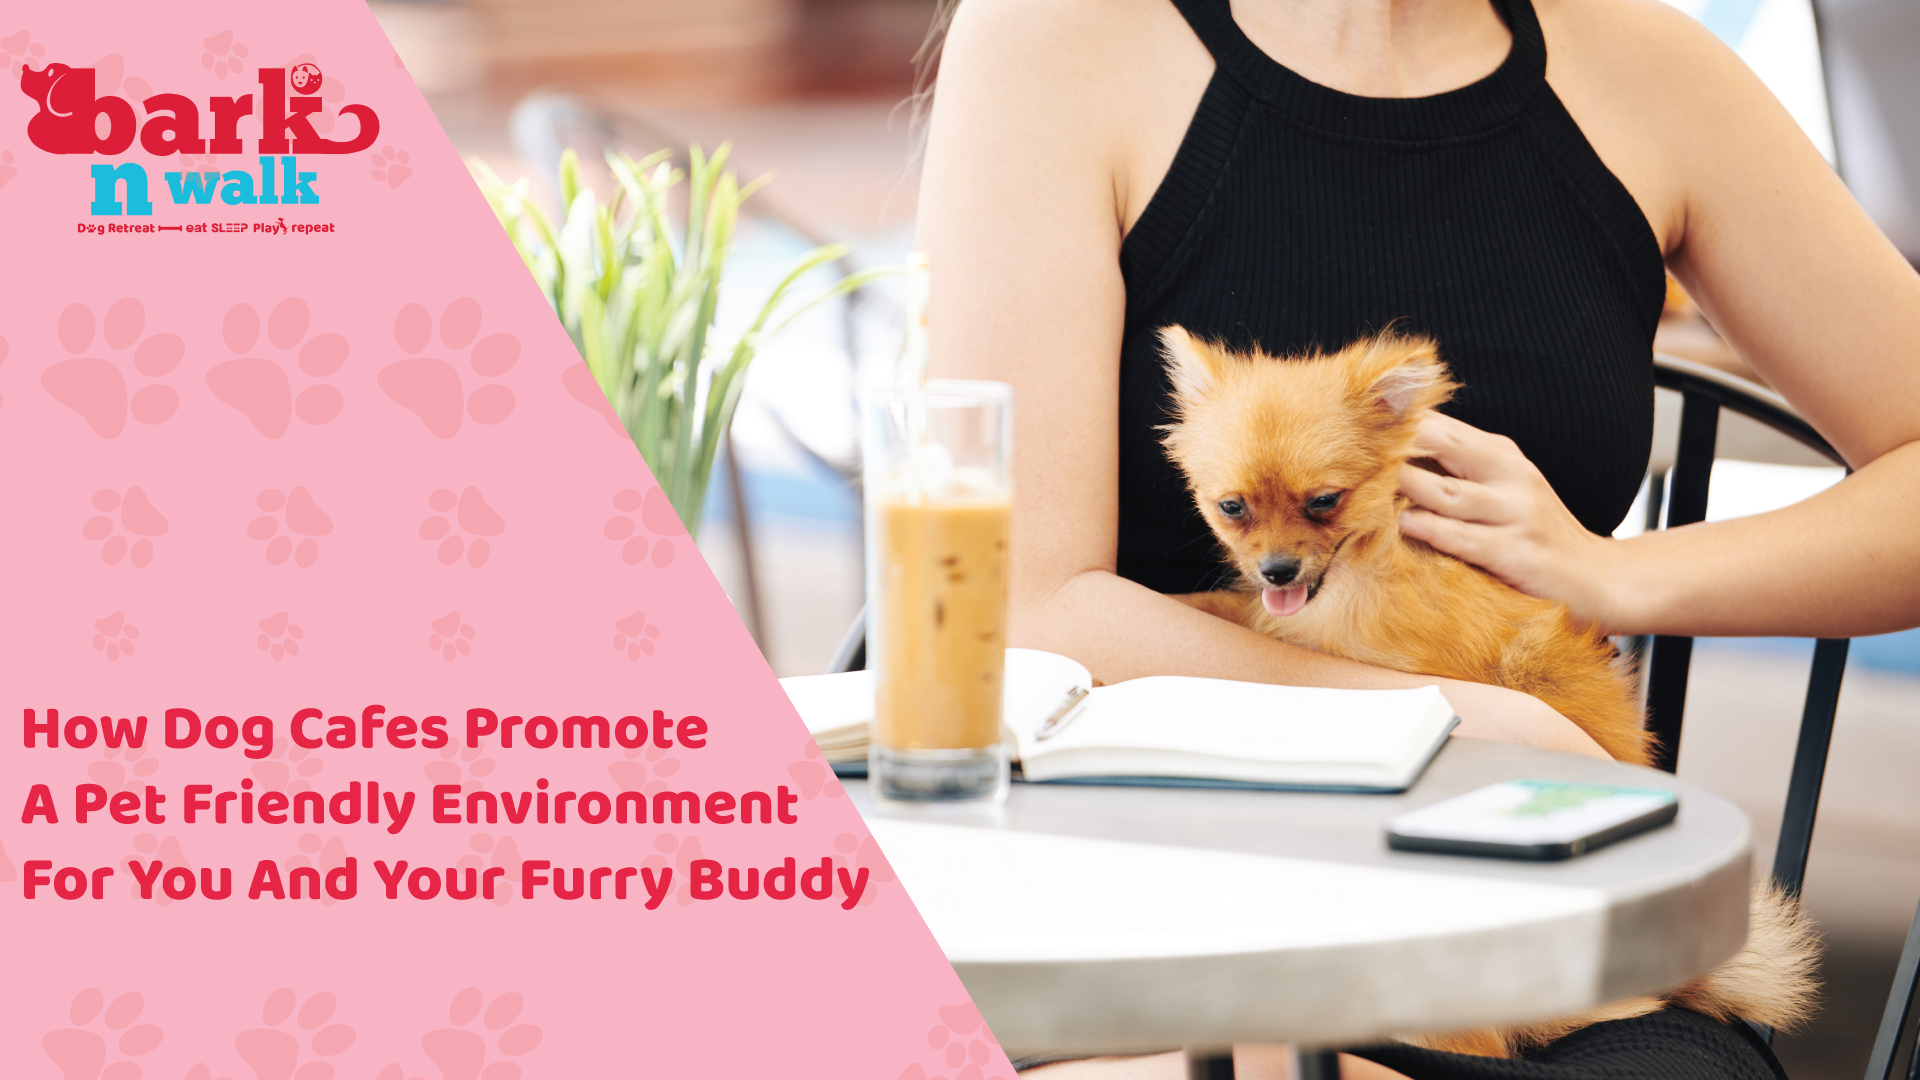 How Dog Cafes Promote A Pet Friendly Environment For You And Your Furry